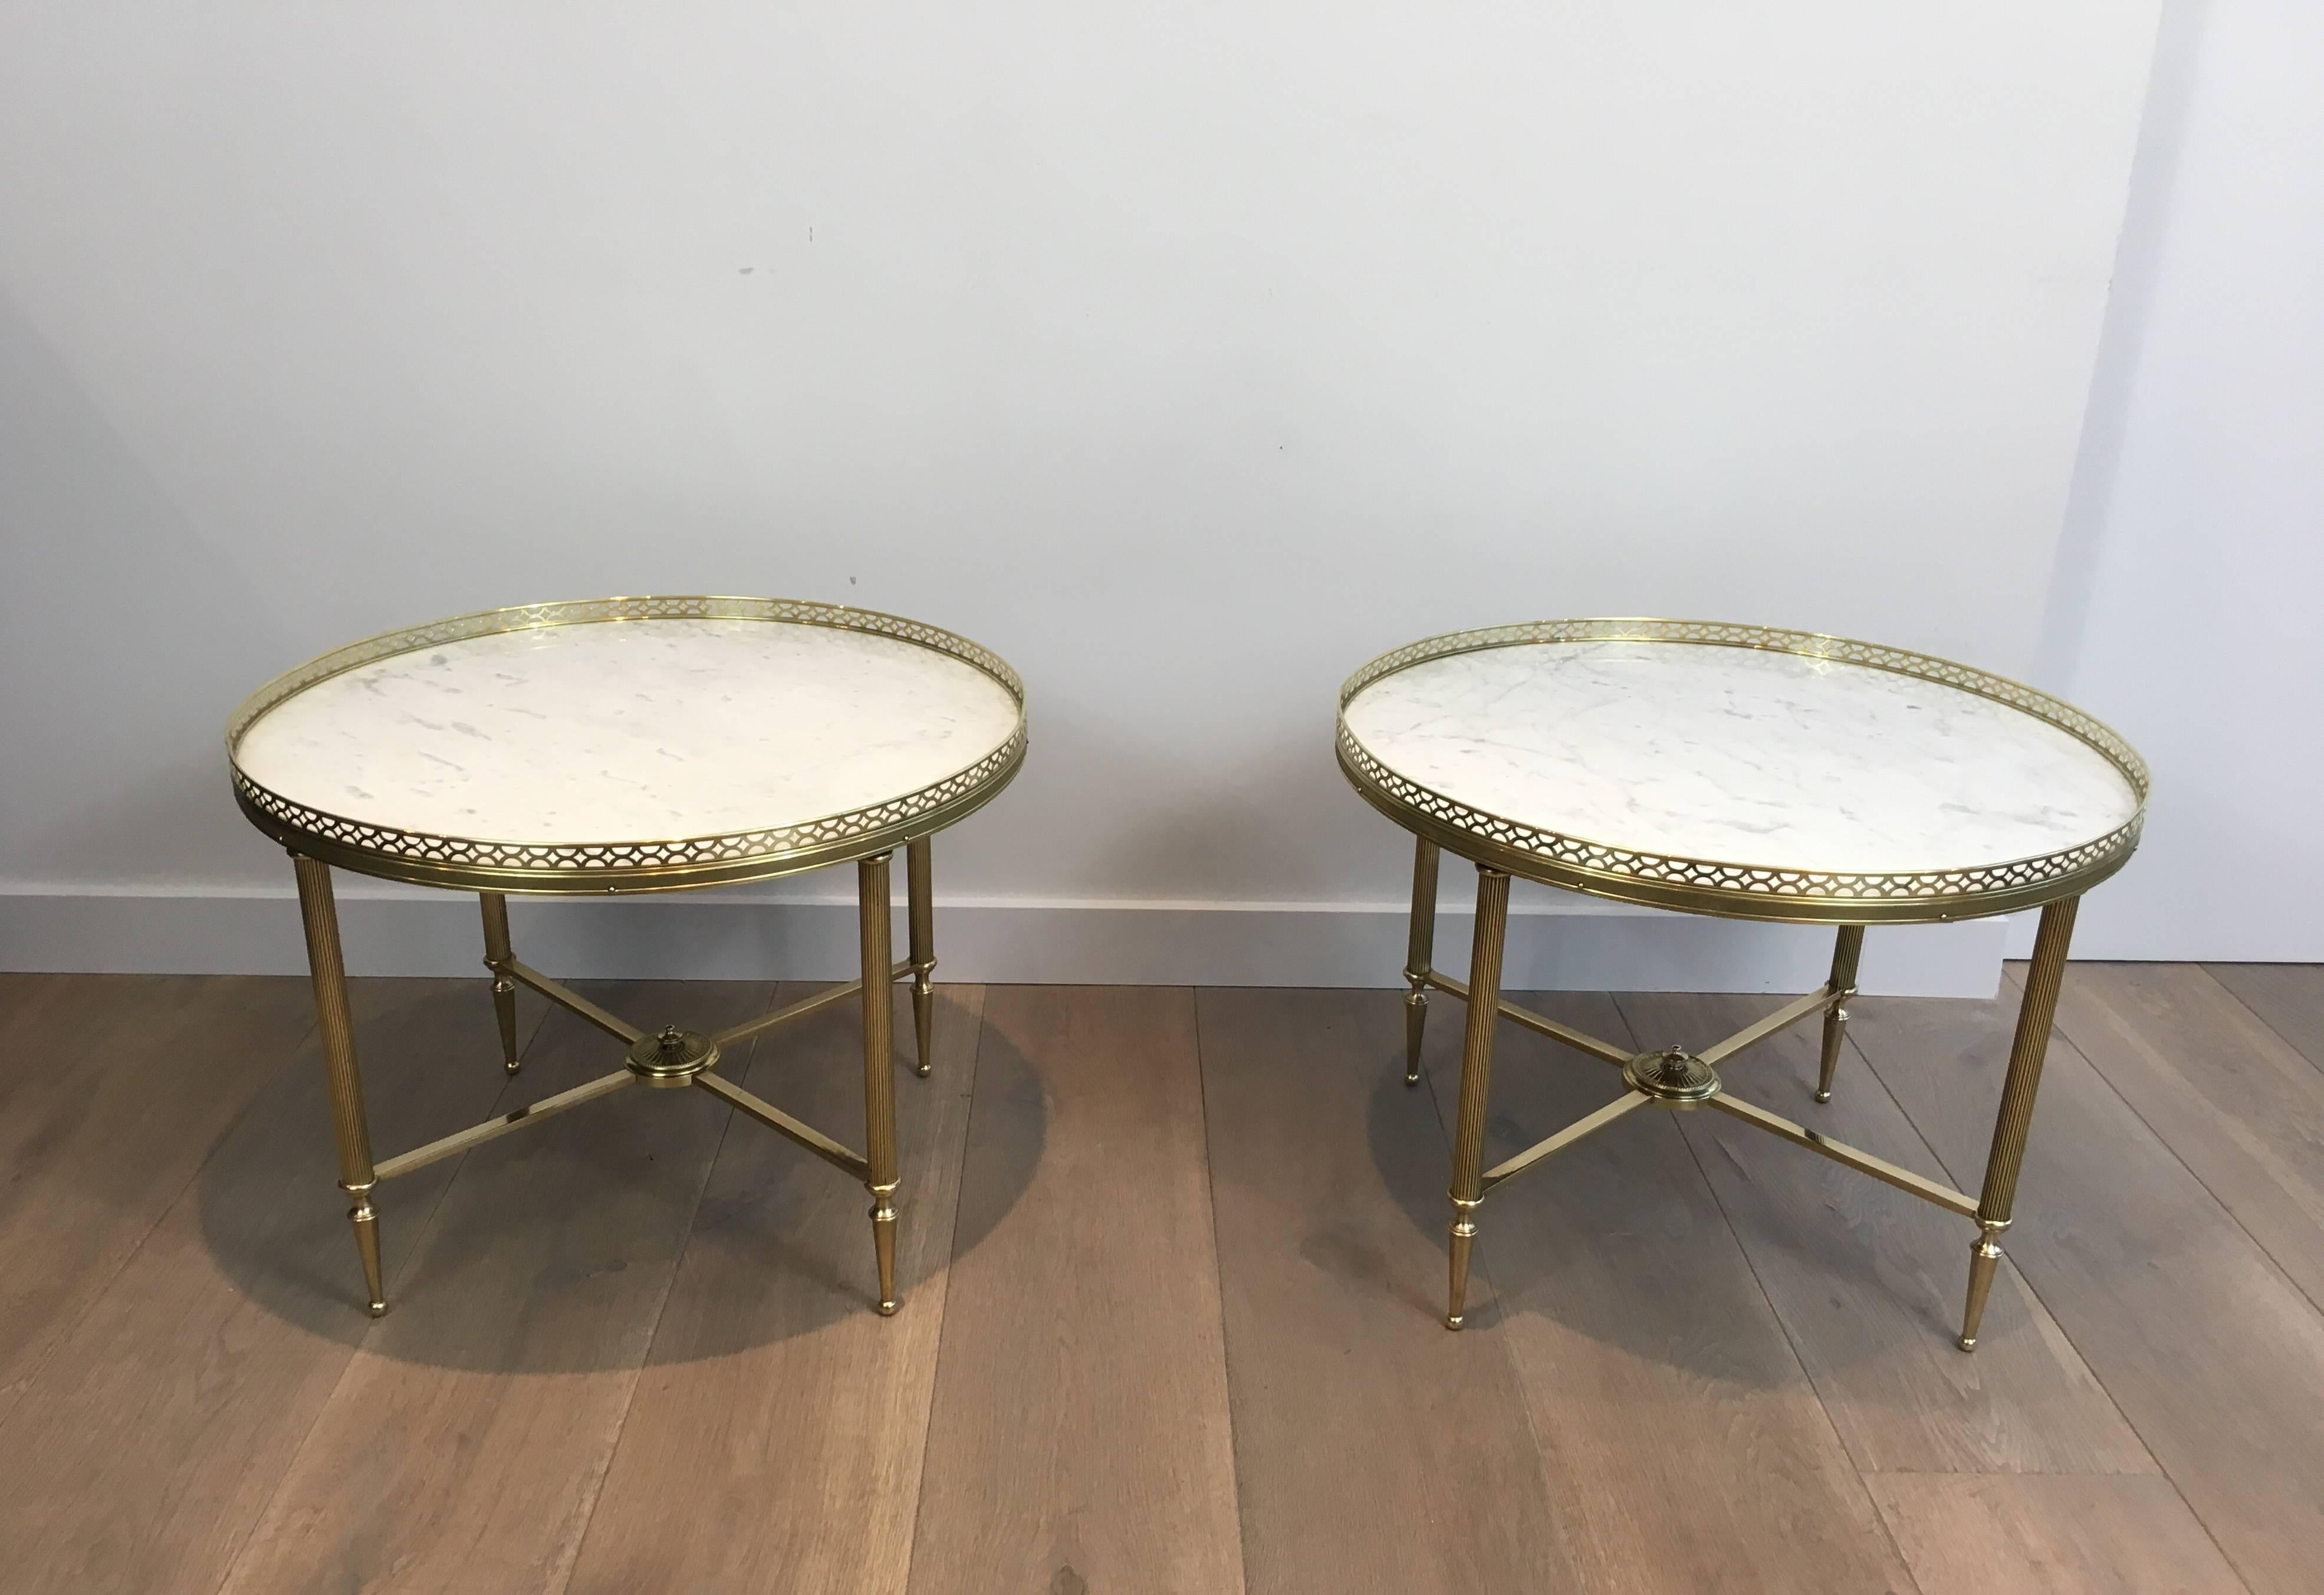 Pair of Maison Jansen neoclassical style brass end tables or coffee tables (17.5 inches high) the white marble tops are enclosed in a brass gallery and mounted on fluted and tapered legs that are joined by an X-stretcher with a centre medallion,